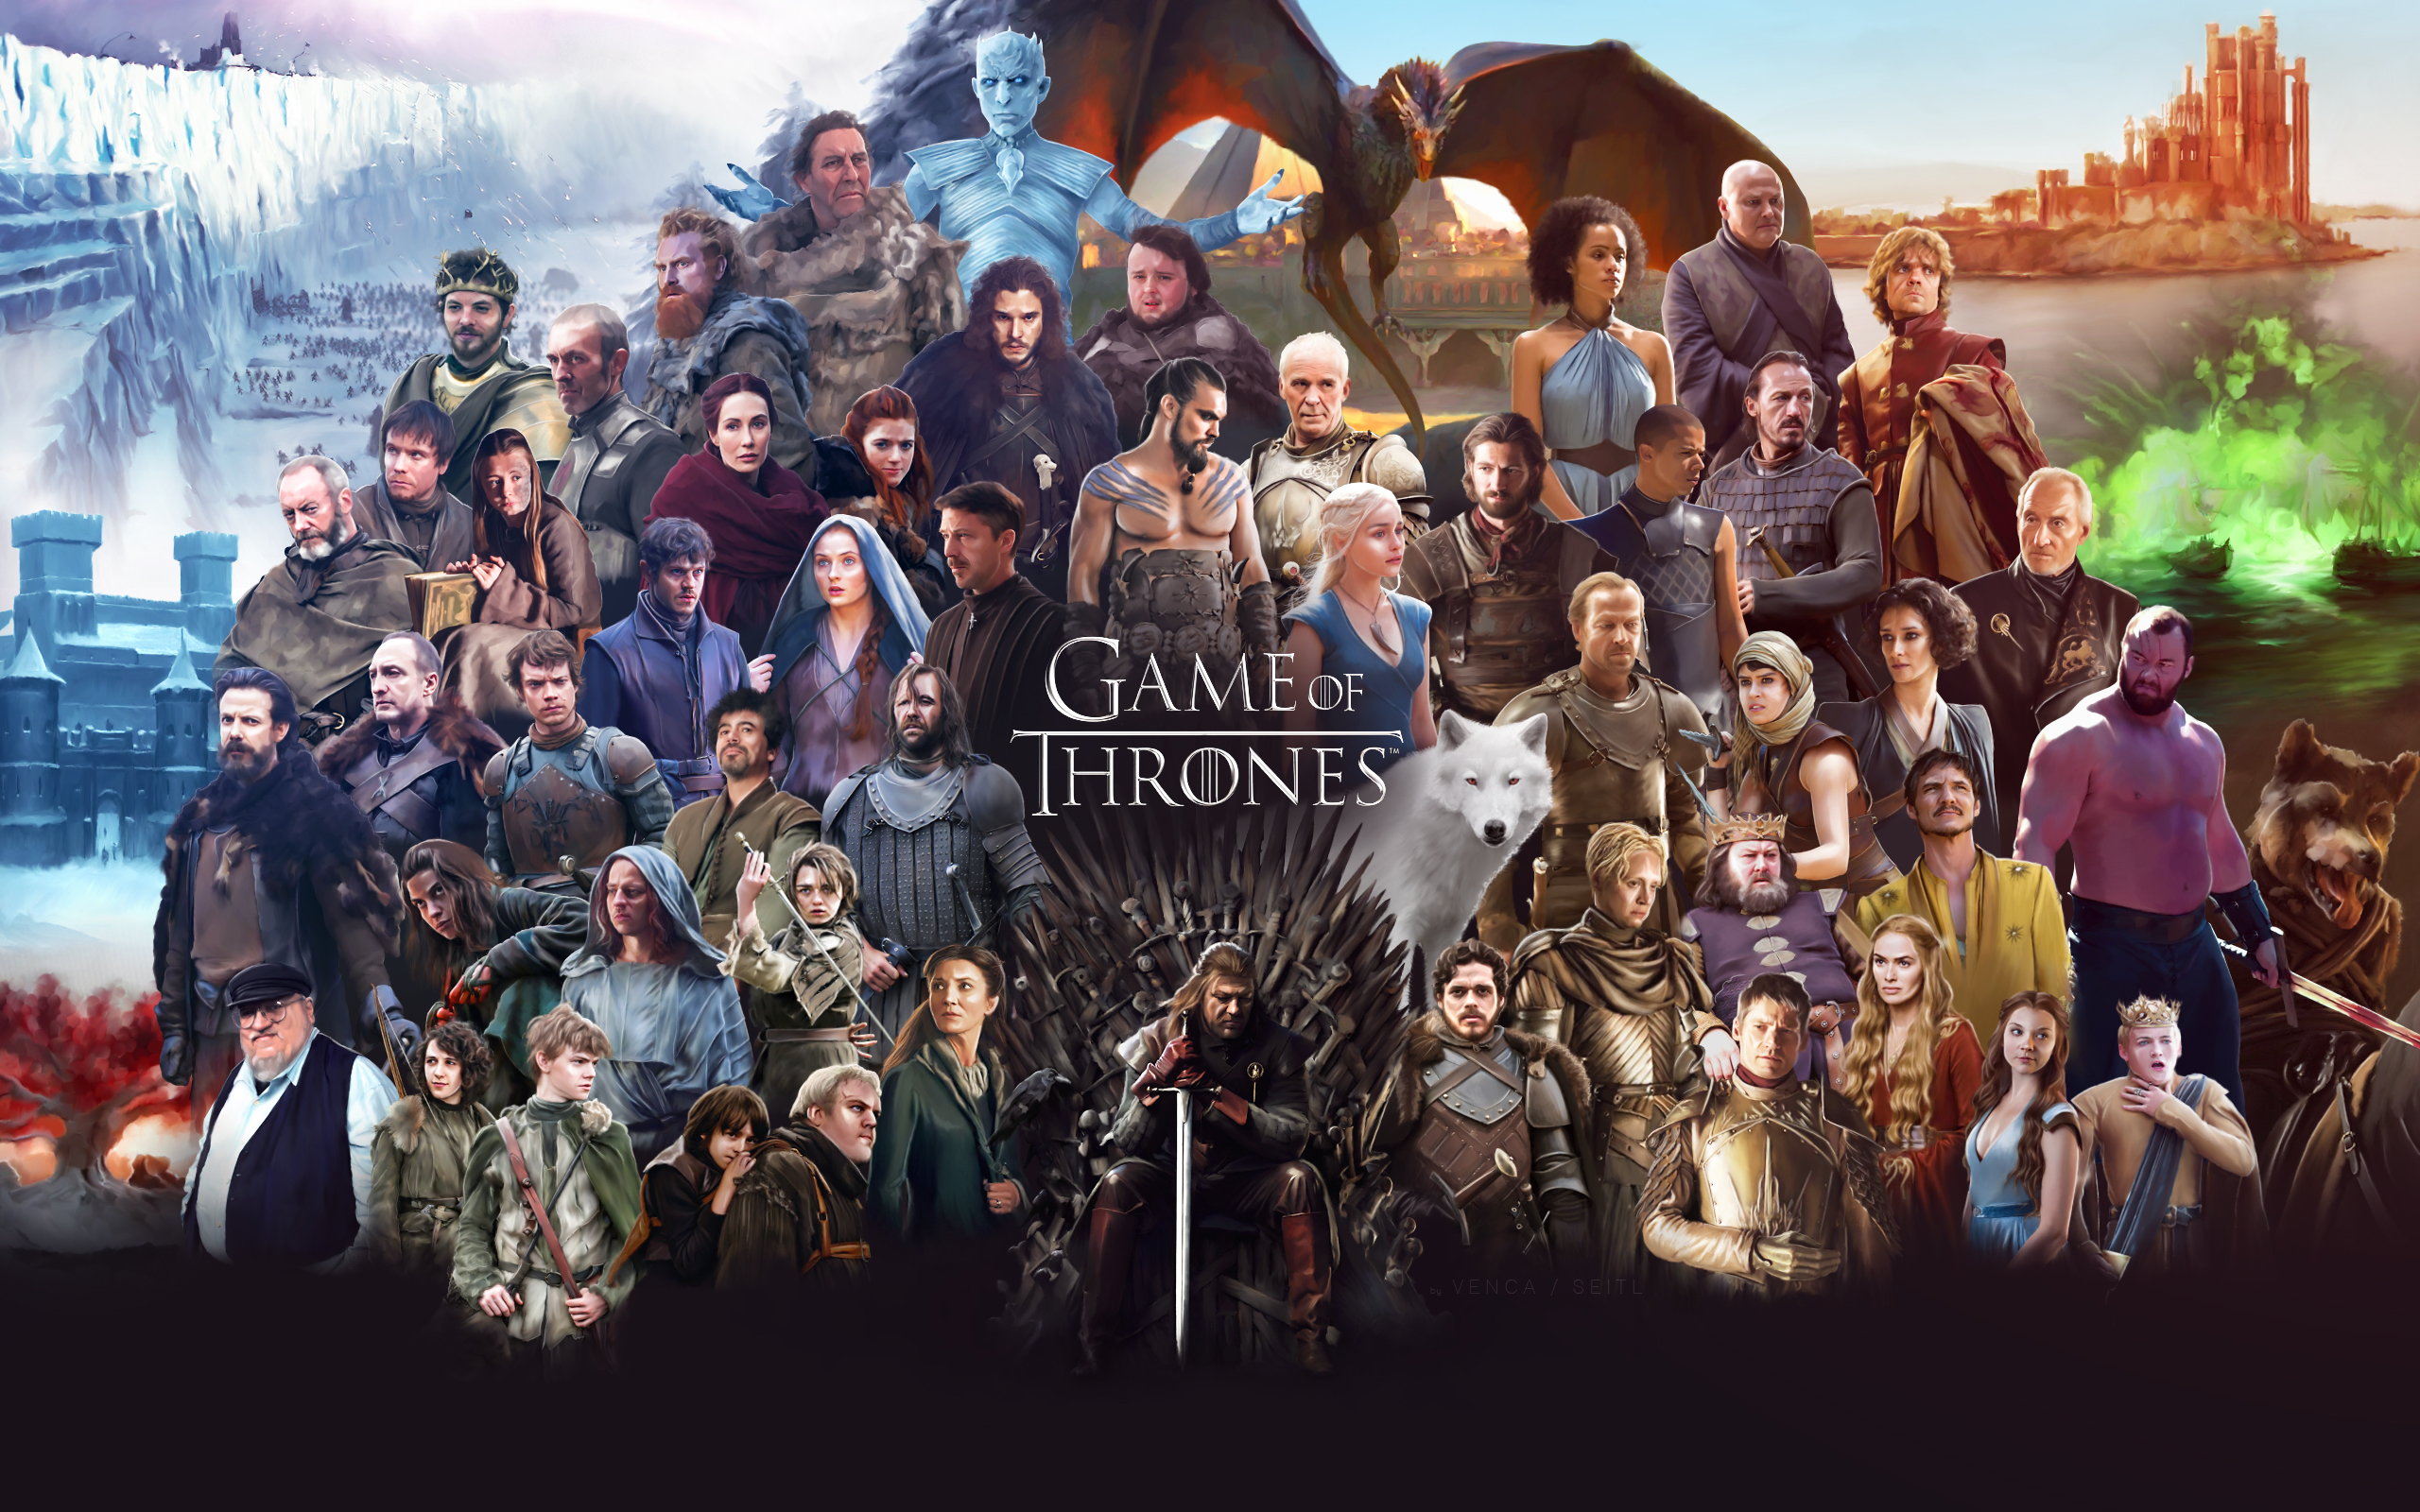 2048x2048 Game Of Thrones All Cast Ipad Air Hd 4k Wallpapers Images Backgrounds Photos And